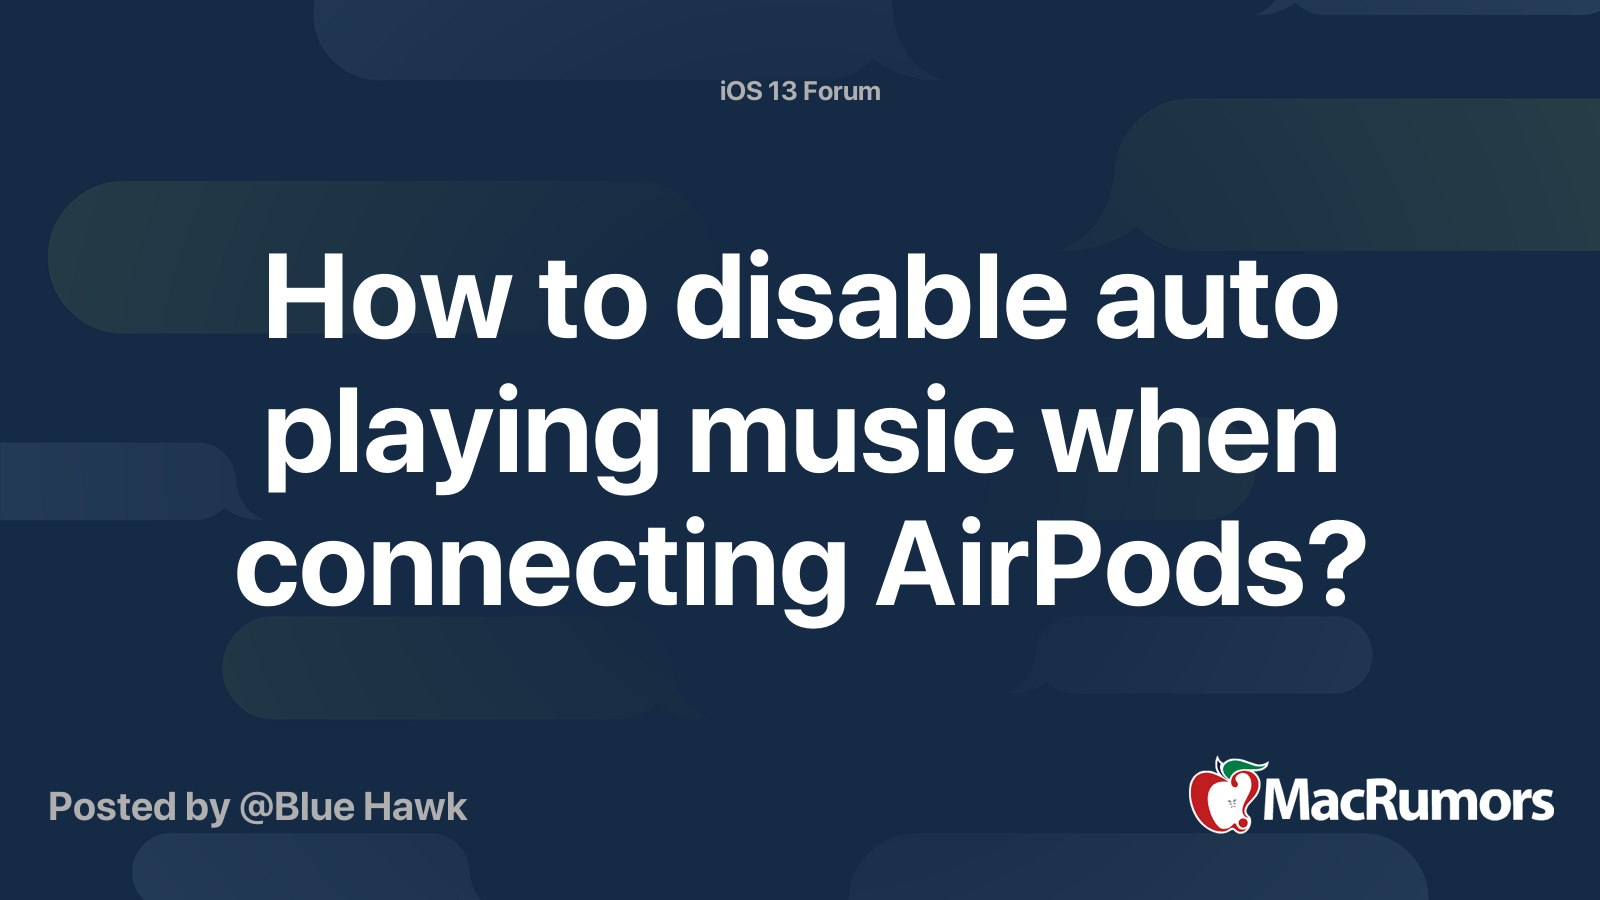 How to disable auto playing music when connecting AirPods?